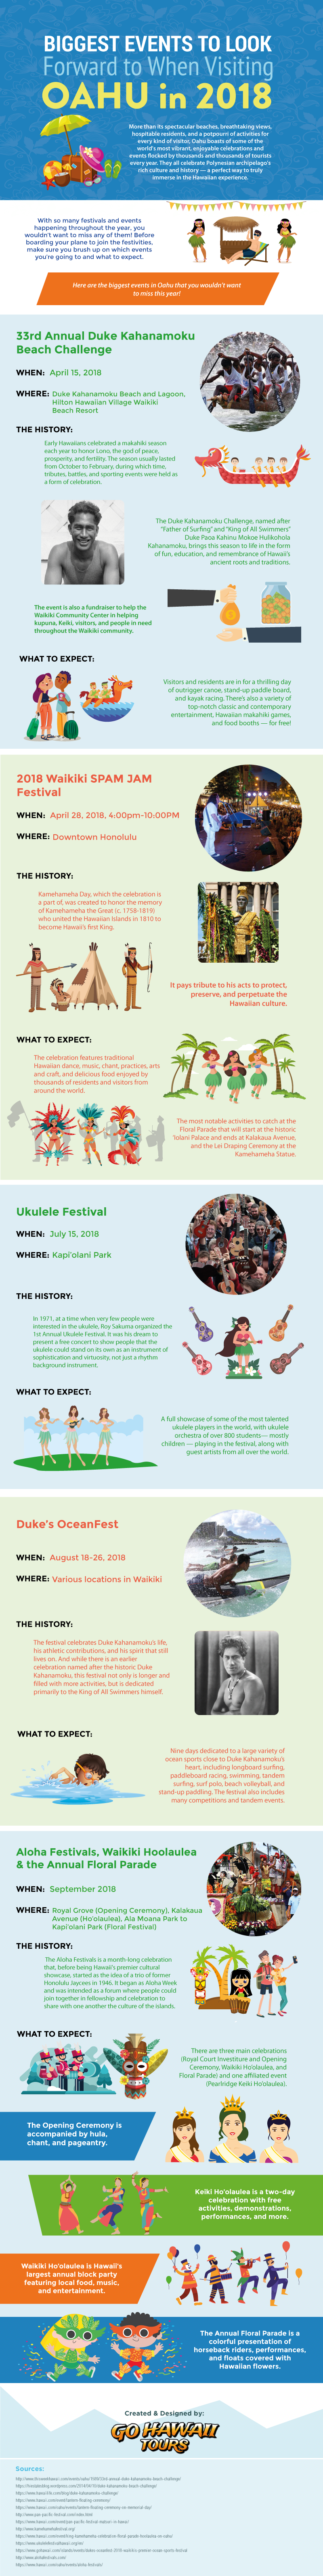 Biggest-events-to-look-forward-to-when-visiting-Oahu-in-2018-Infographic_image